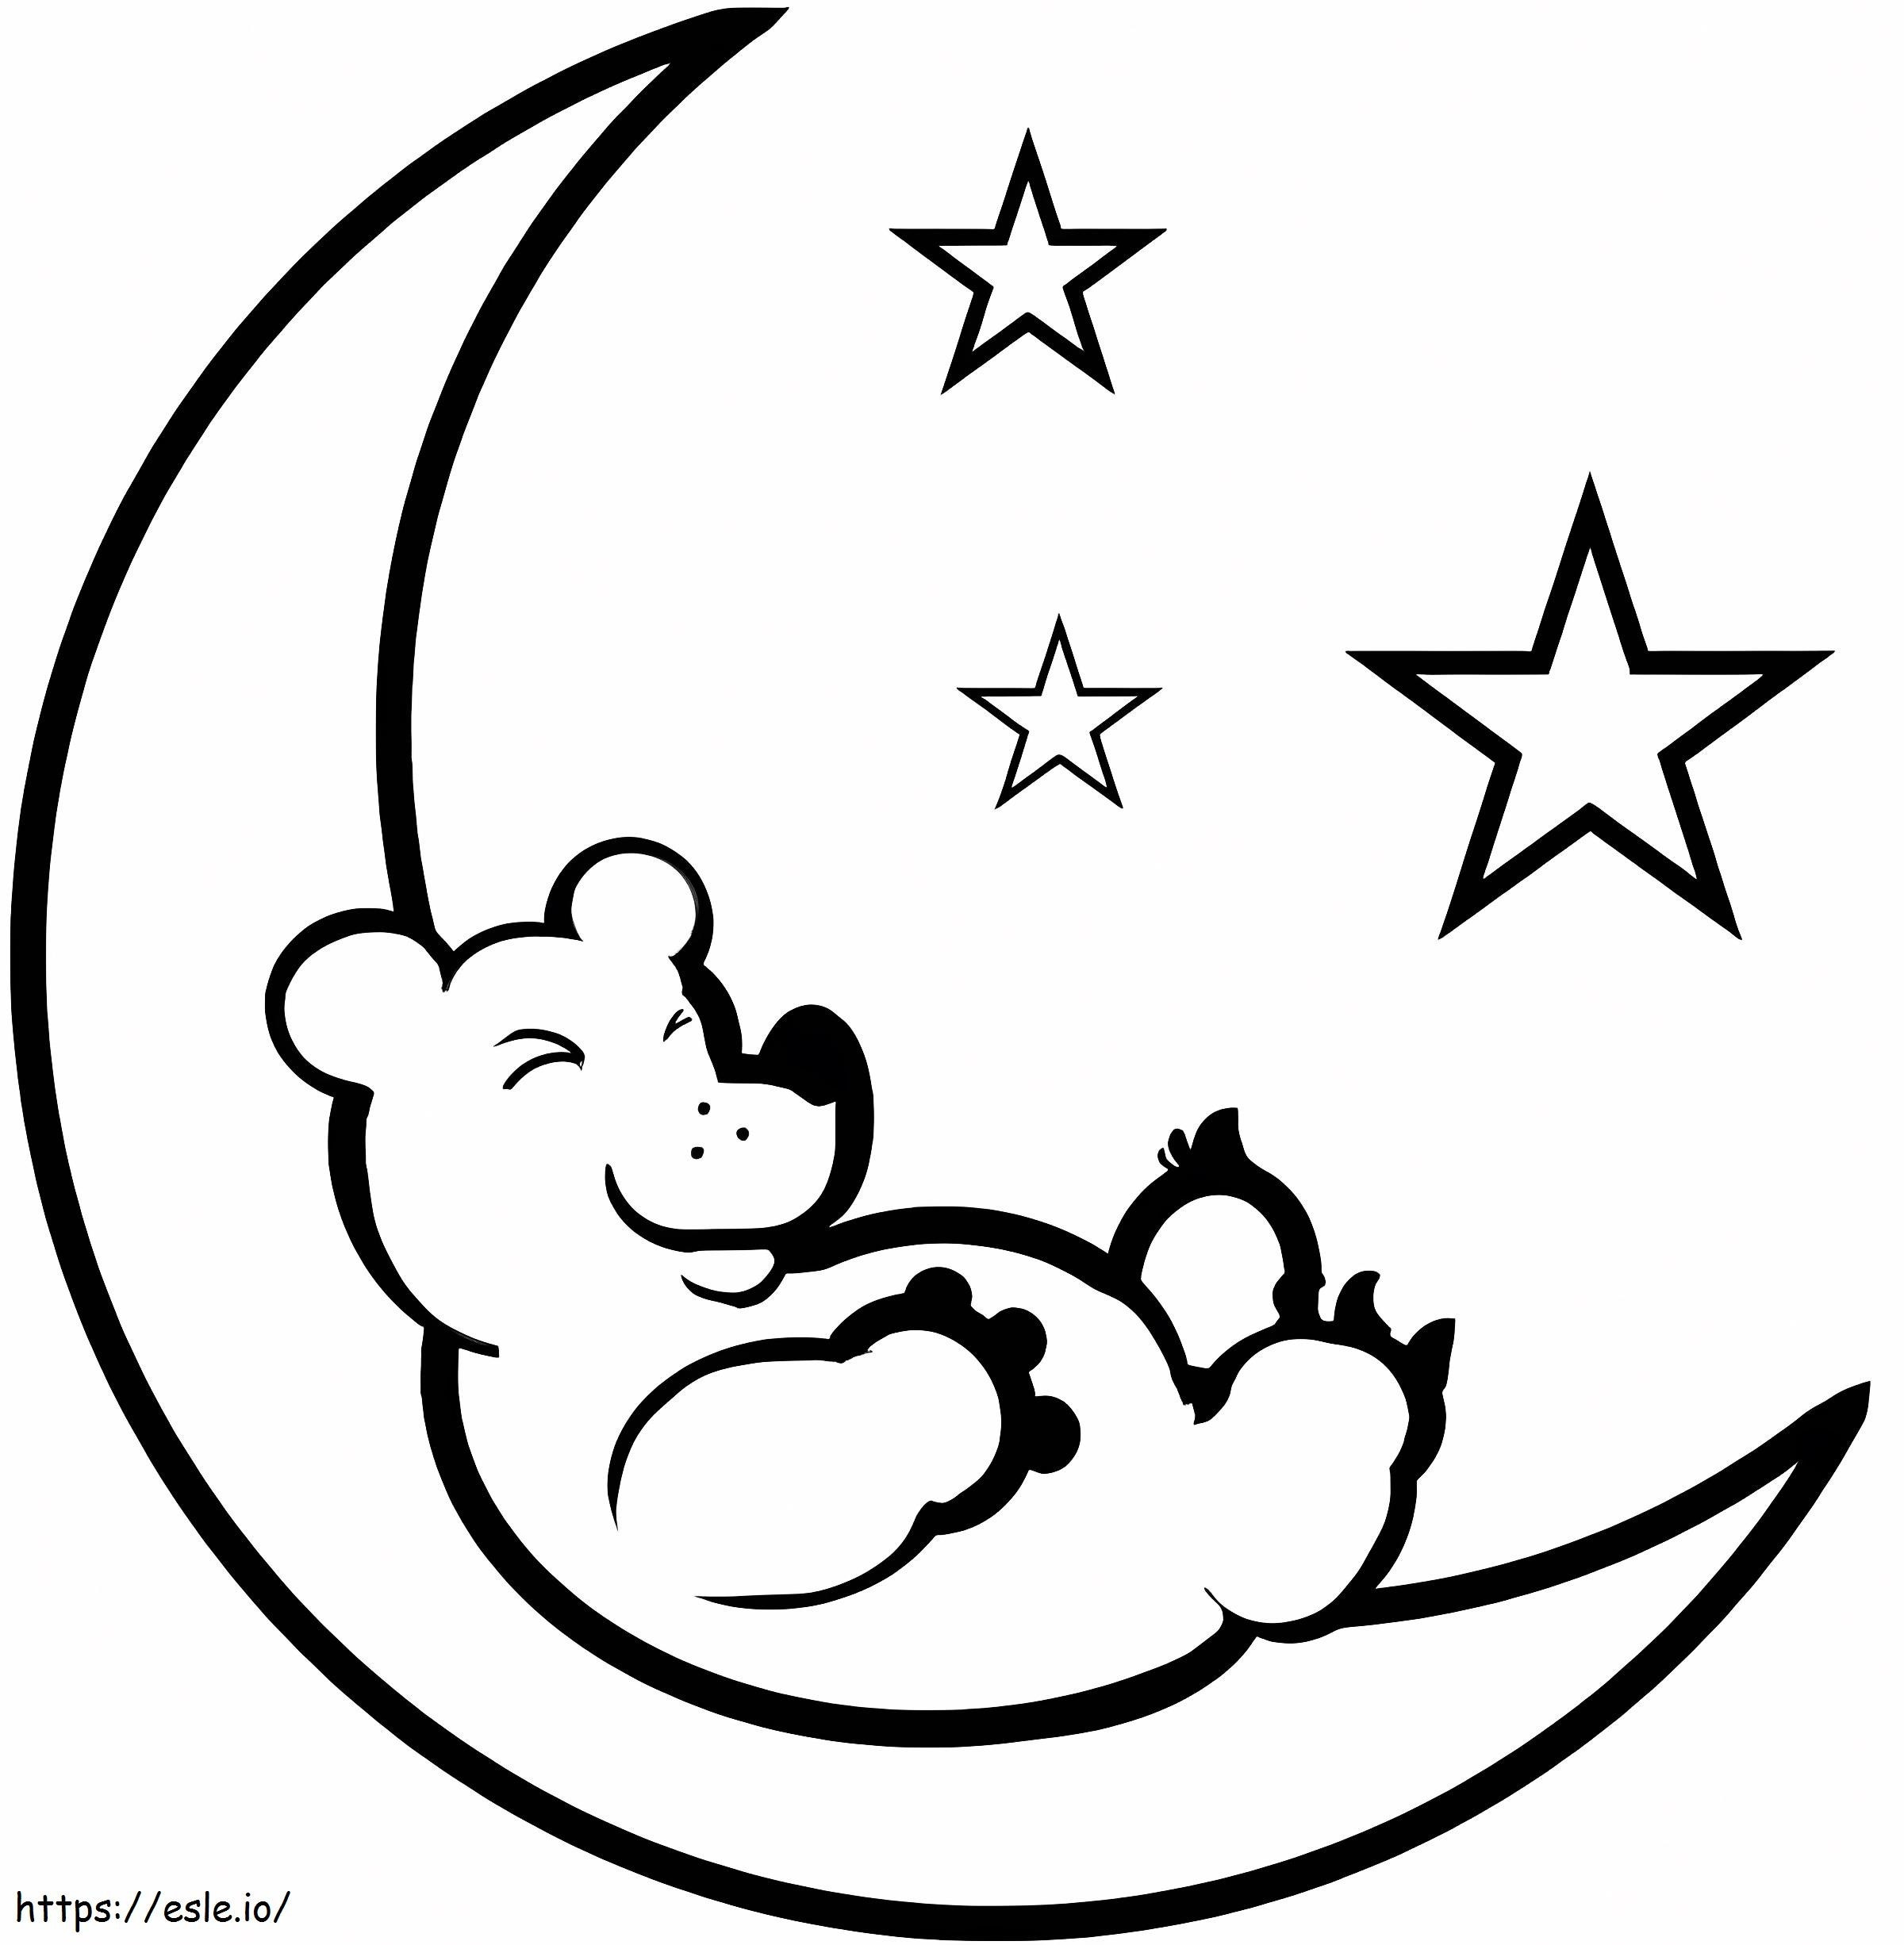 Bear Lying On The Moon coloring page